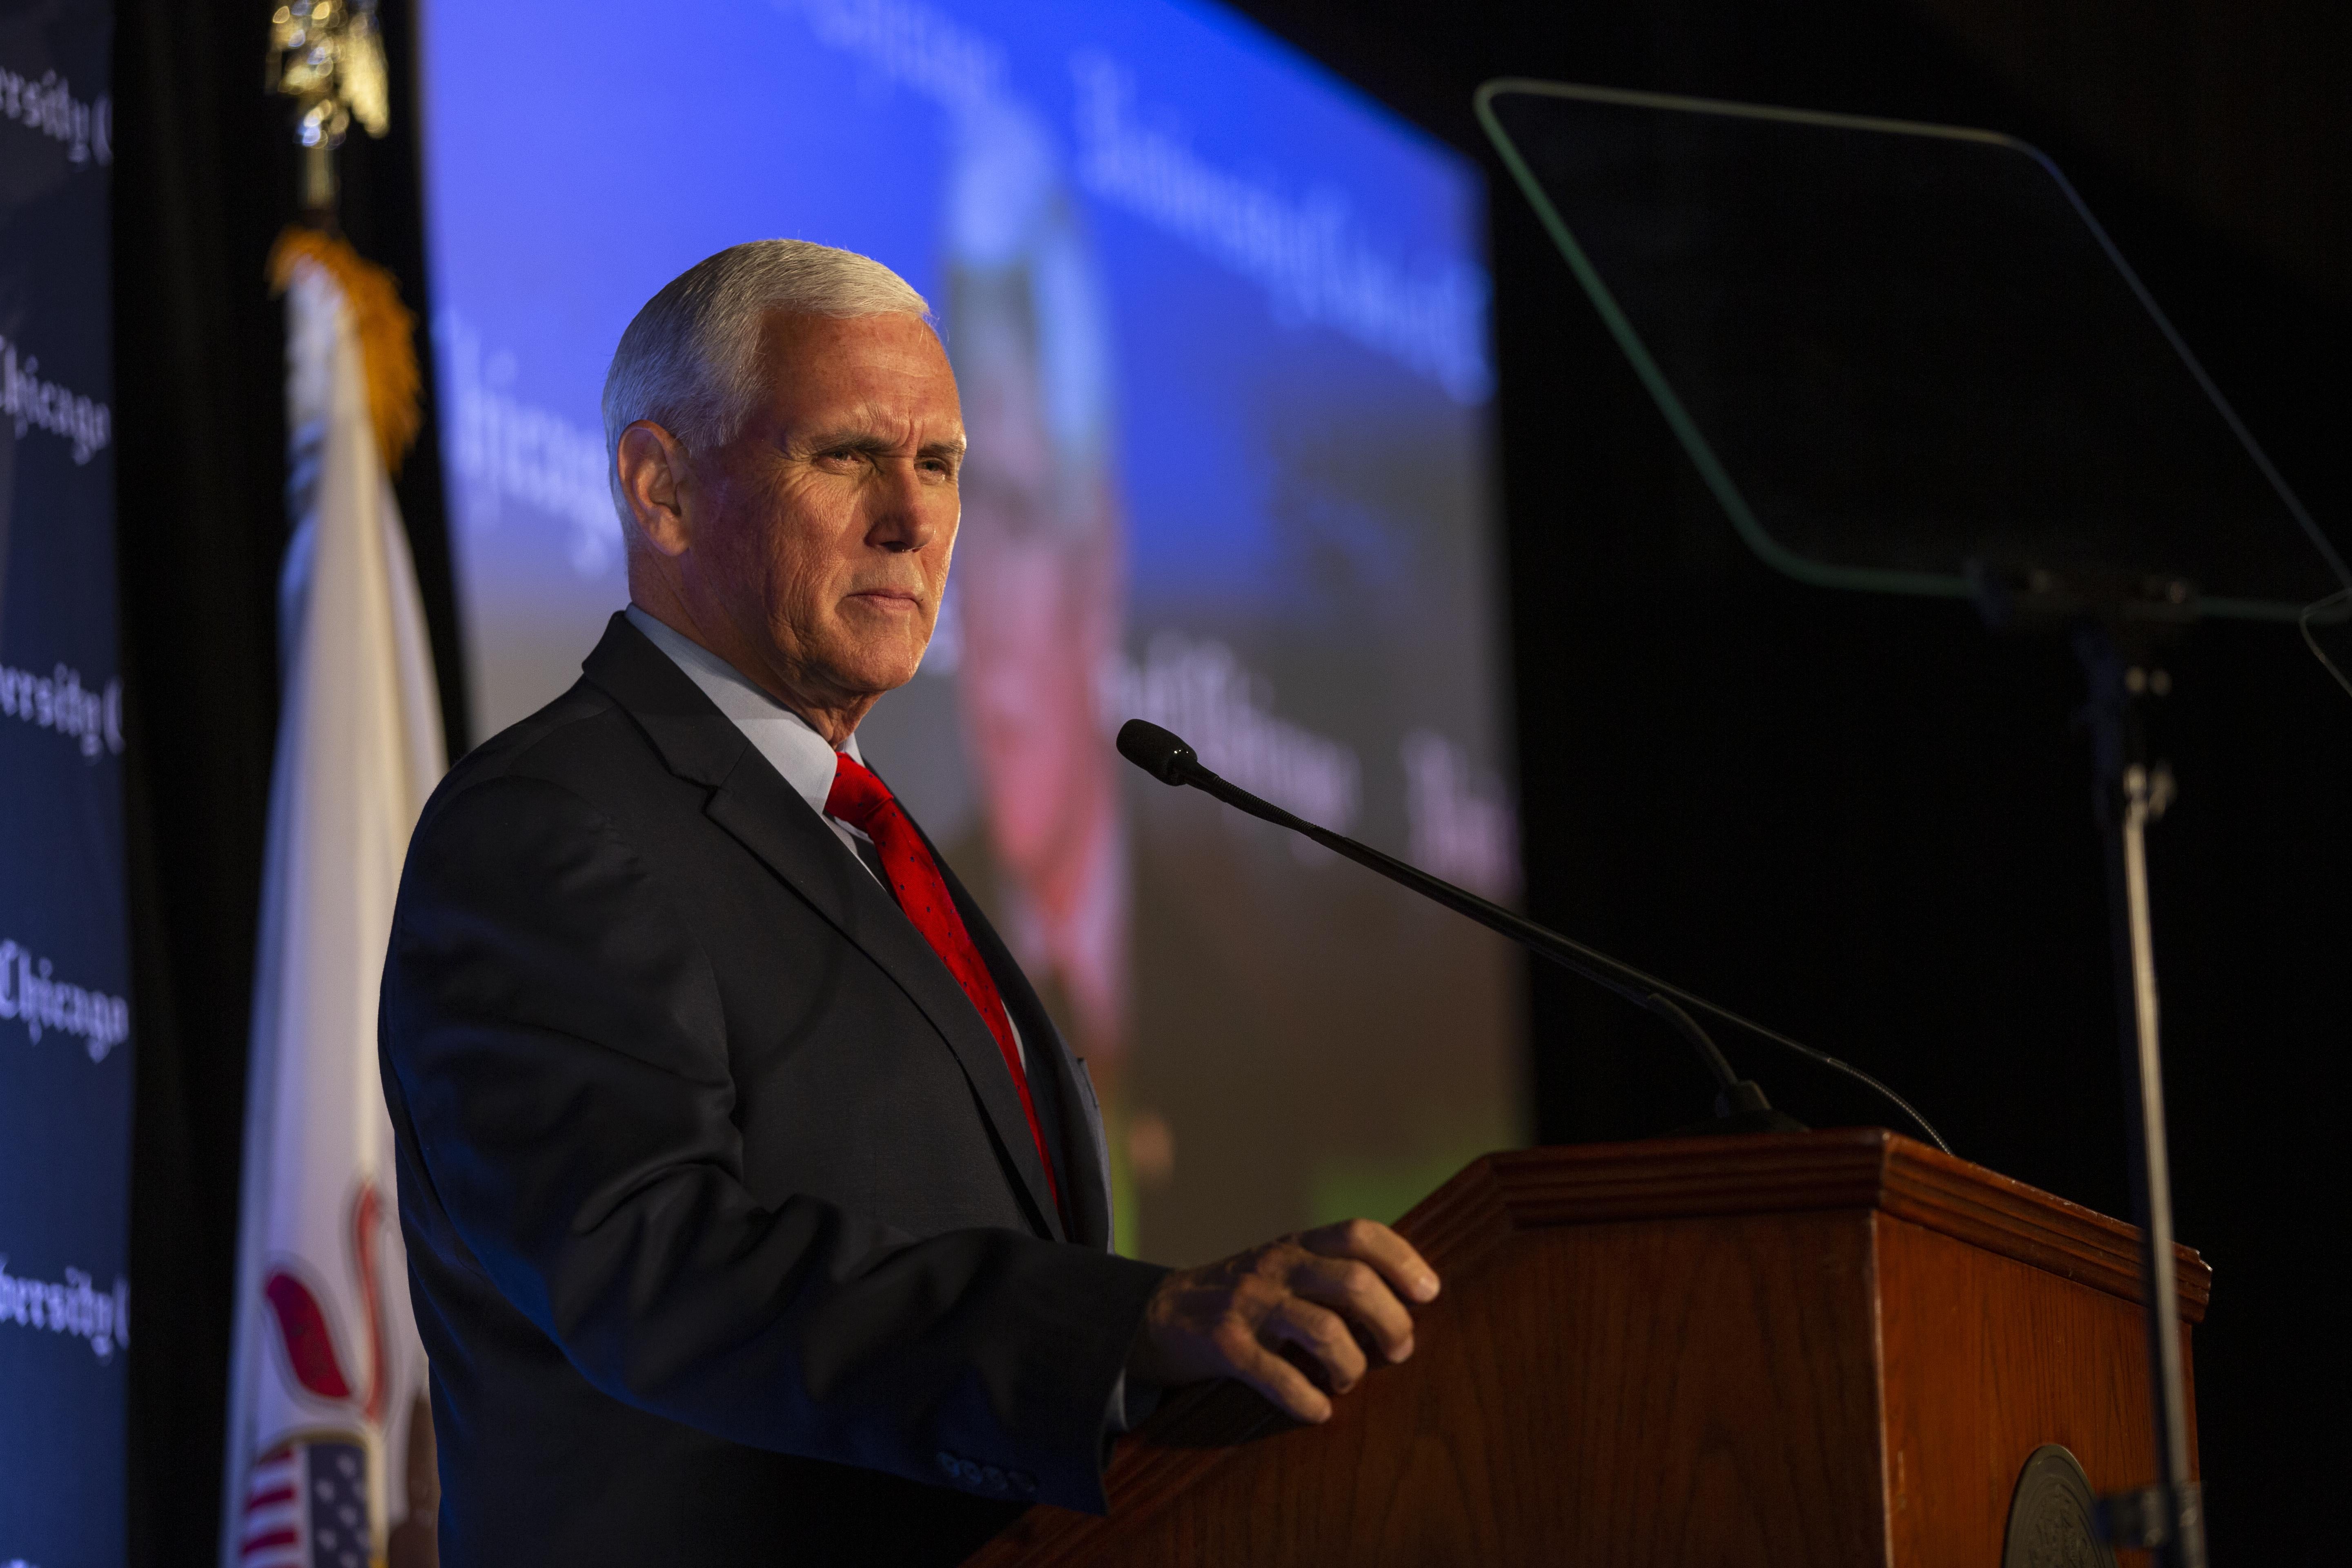 CHICAGO, IL - JUNE 20: Former Vice President Mike Pence speaks to a crowd of supporters at the University Club of Chicago on June 20, 2022 in Chicago, Illinois. During the speech, Pence blamed the Biden administration for the economic problems currently facing the country. (Photo by Jim Vondruska/Getty Images)